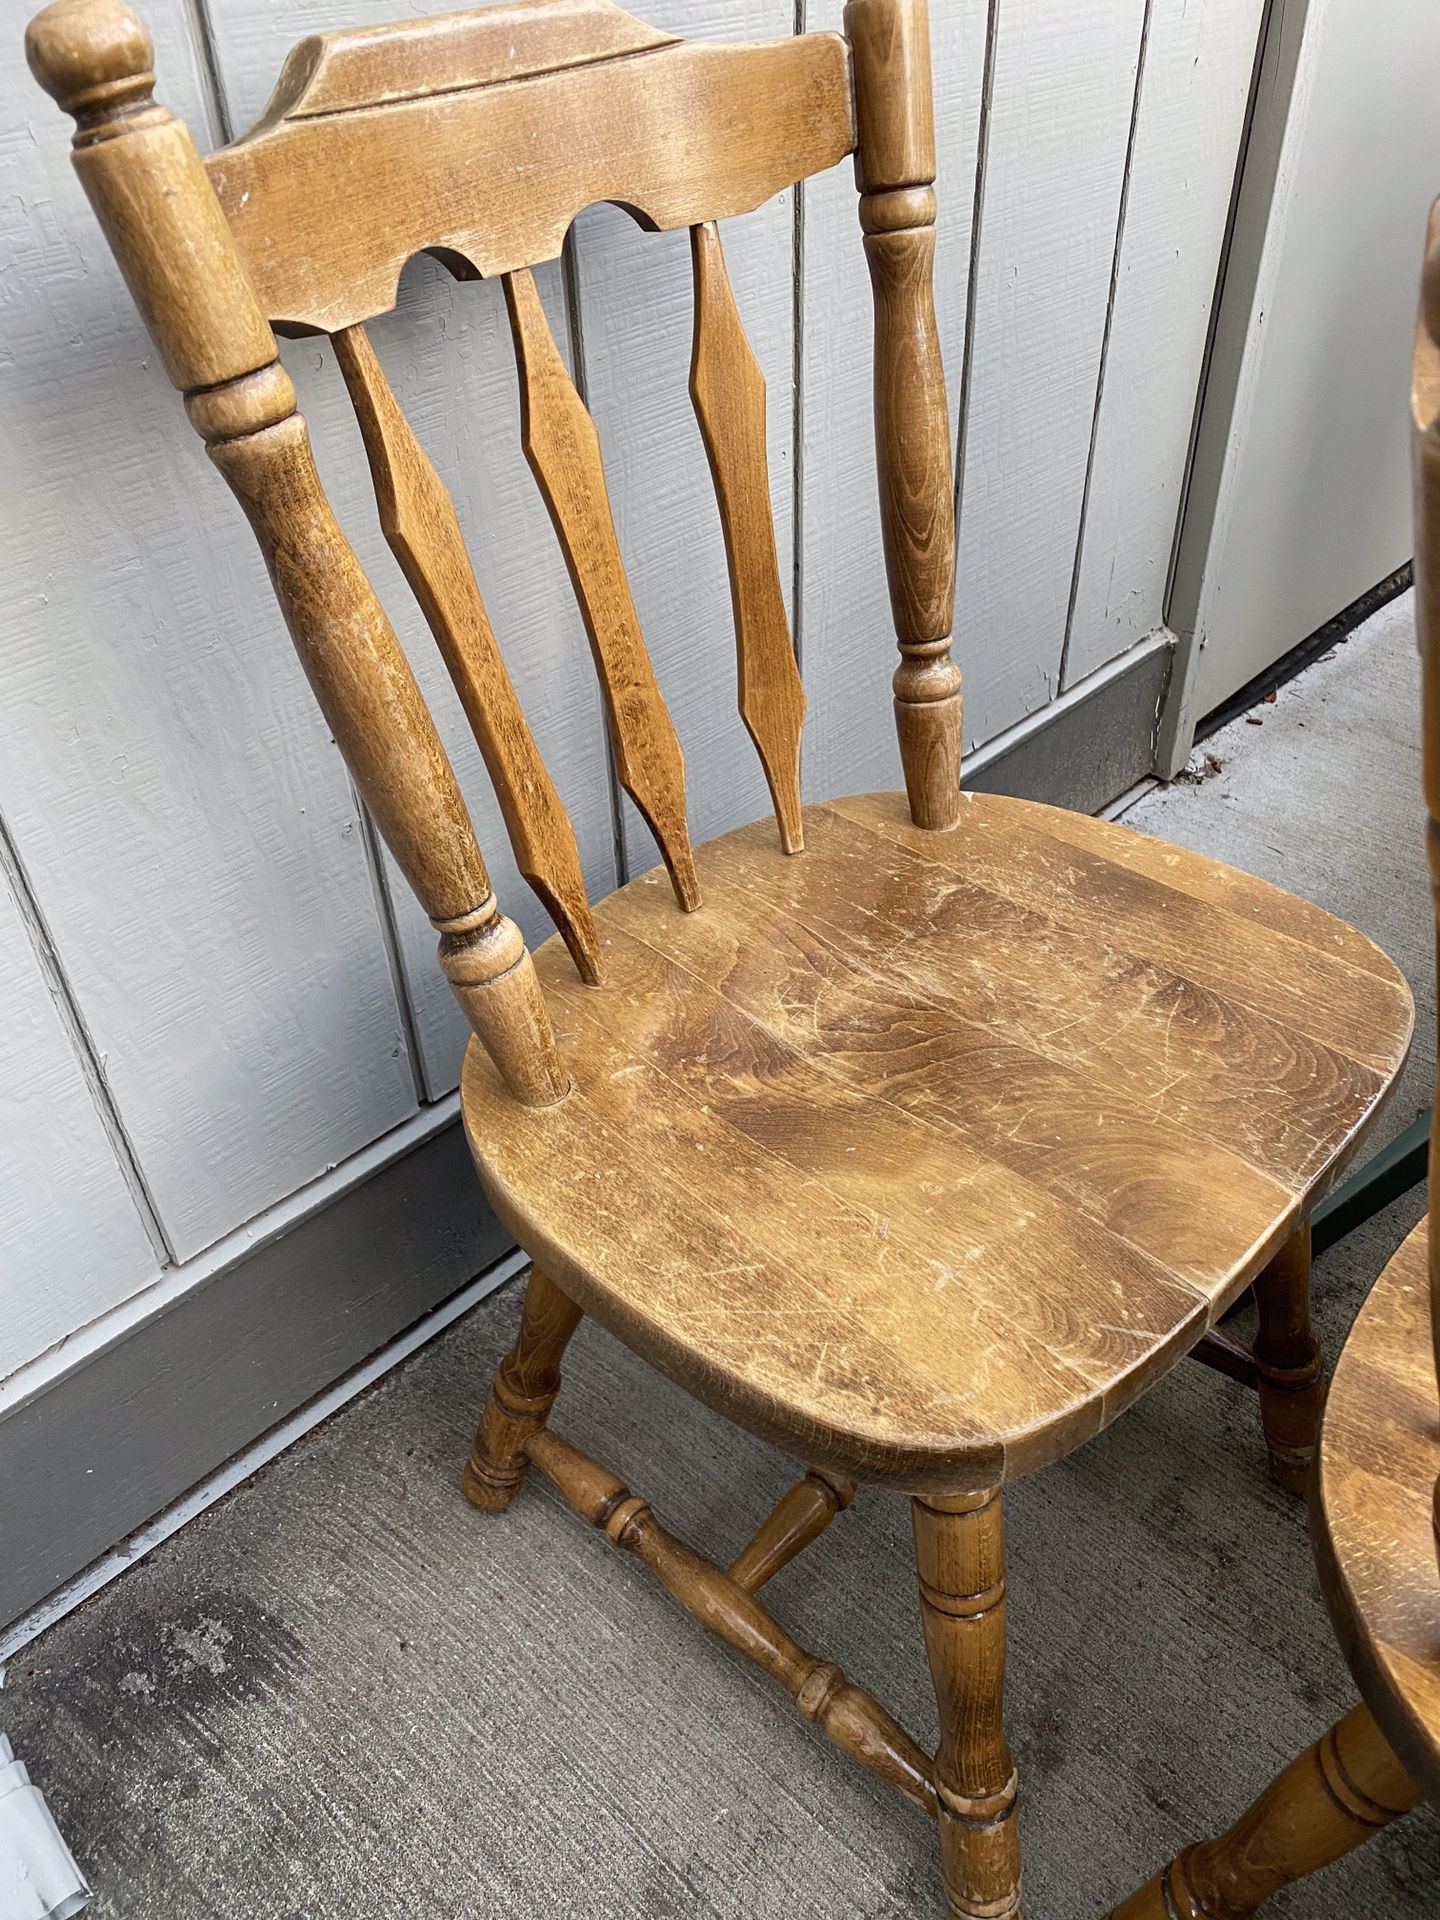 4 matching solid wood chairs.